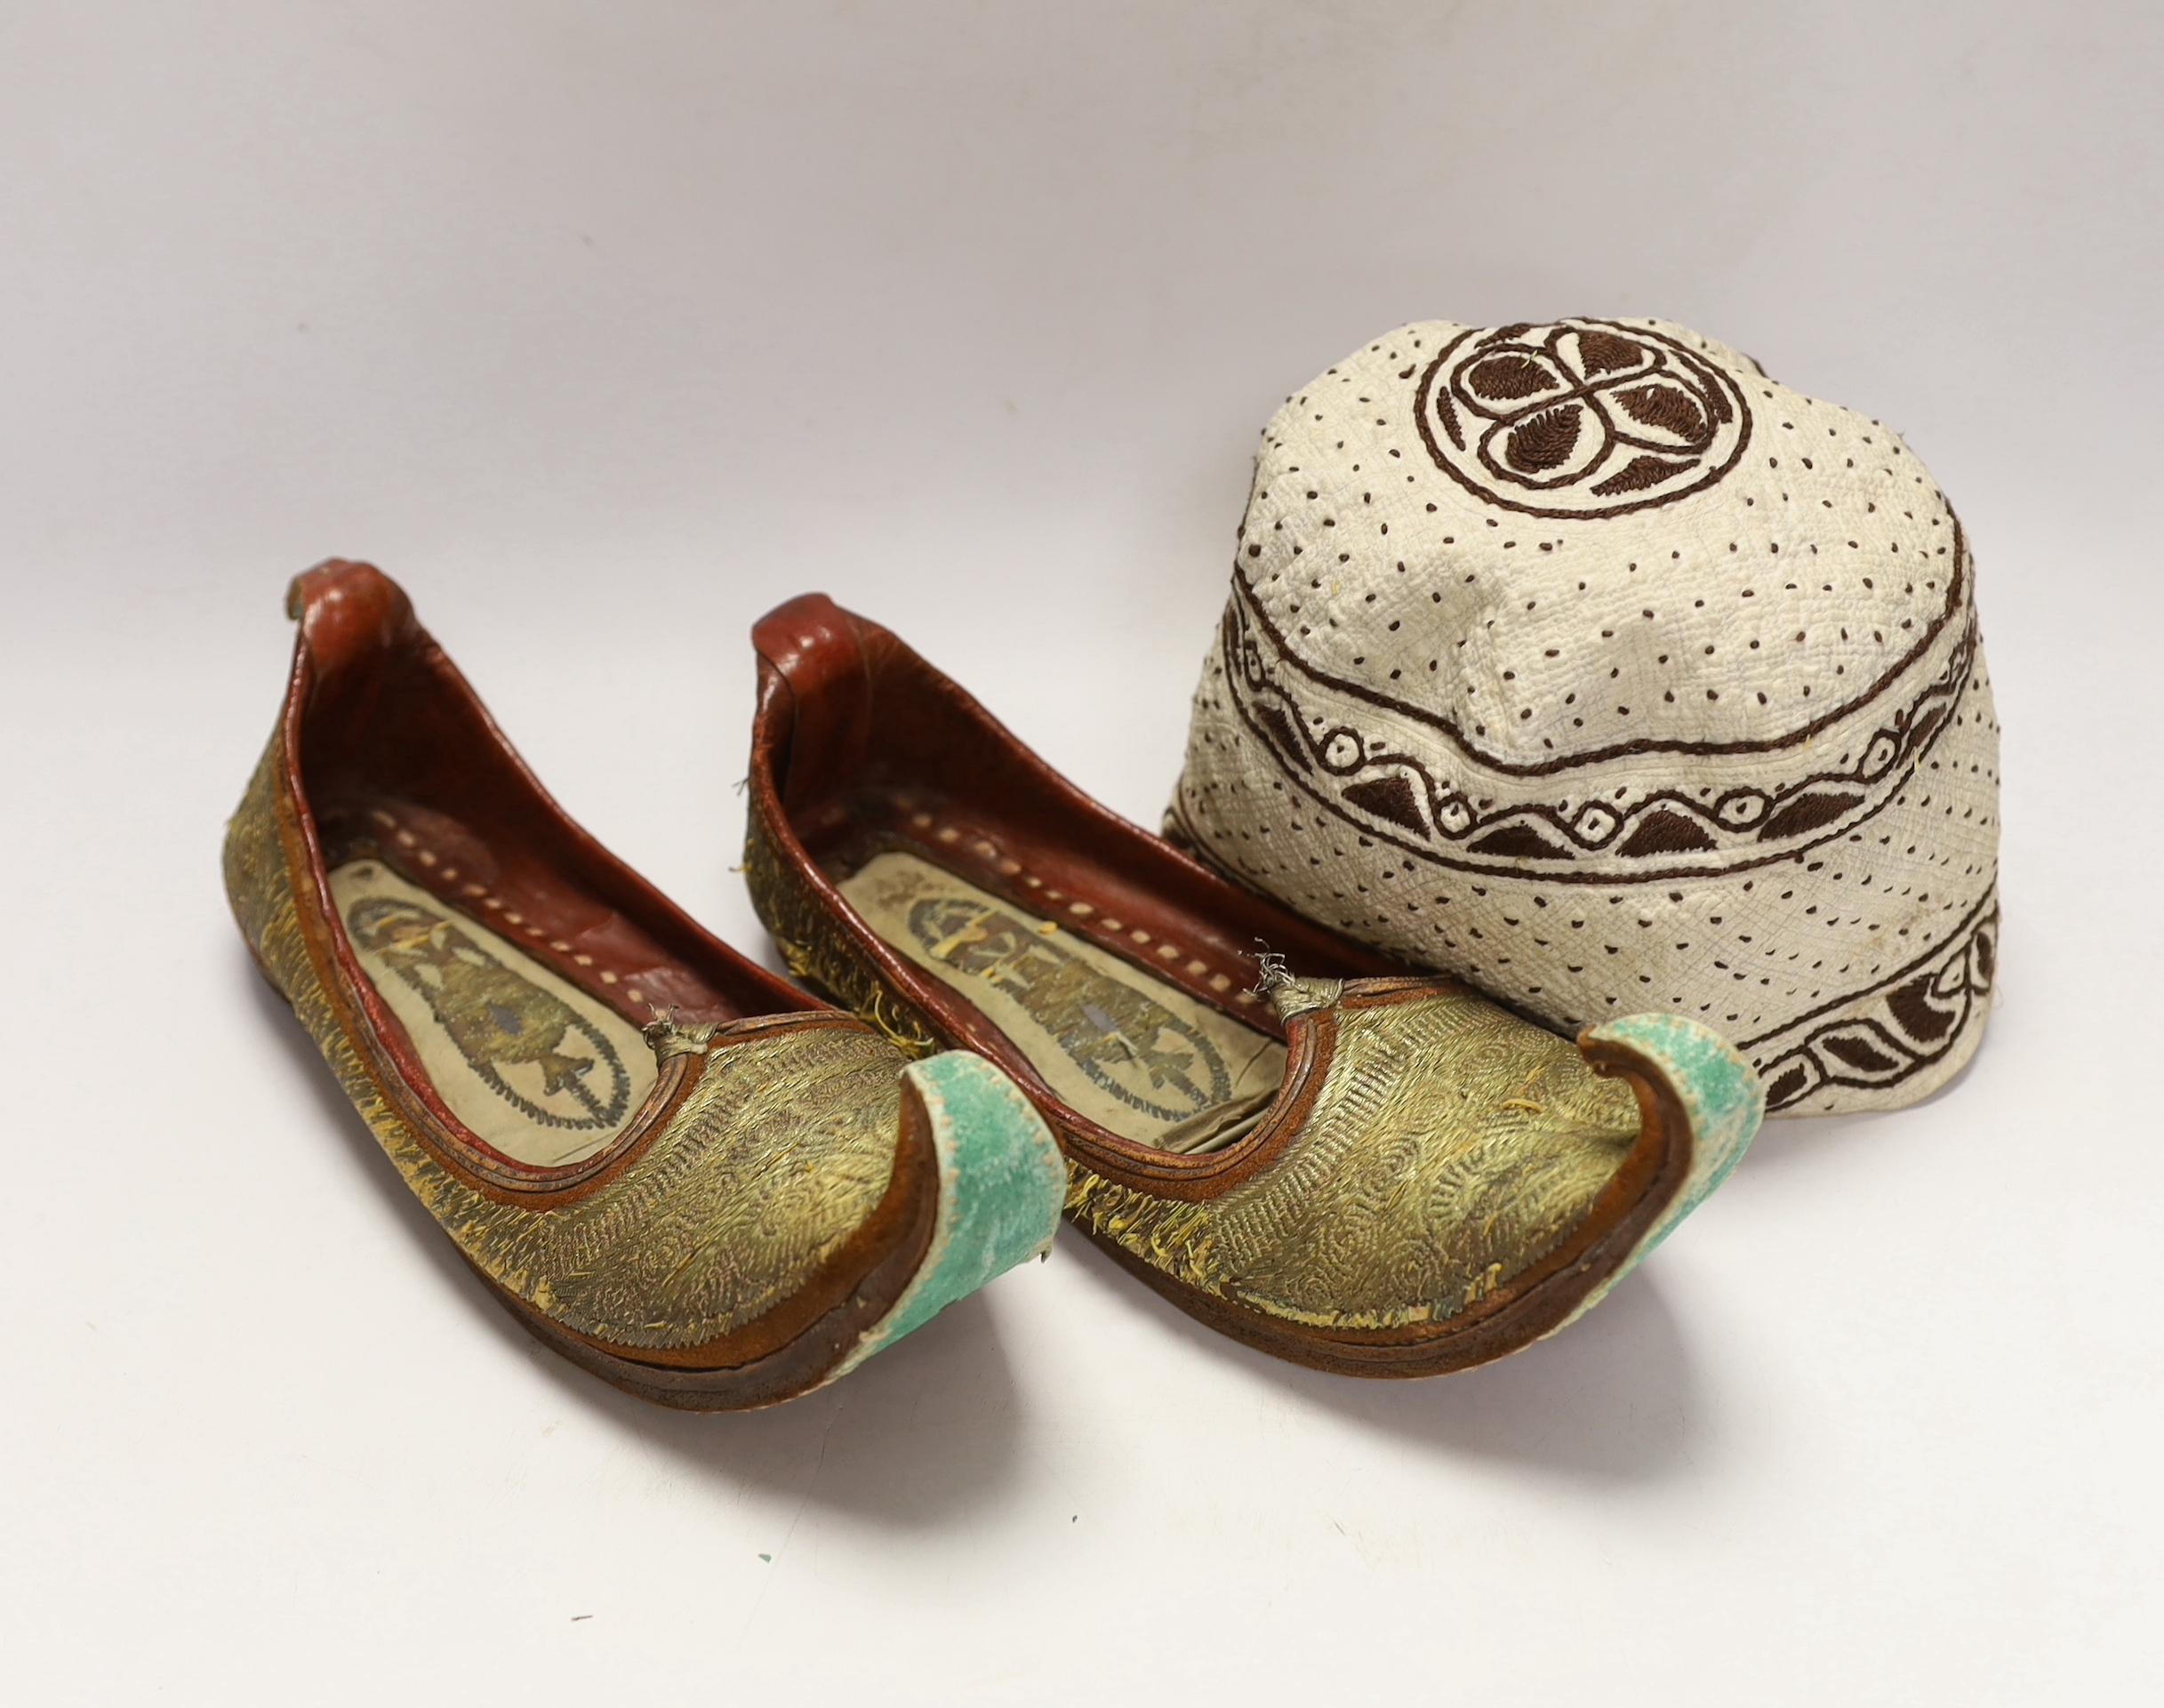 A pair of early 20th century metal thread embroidered Turkish slippers, a pair of similar embroidered red velvet children’s Indian slippers, an embroidered chain stitch drawstring purse and a quilted child’s hat